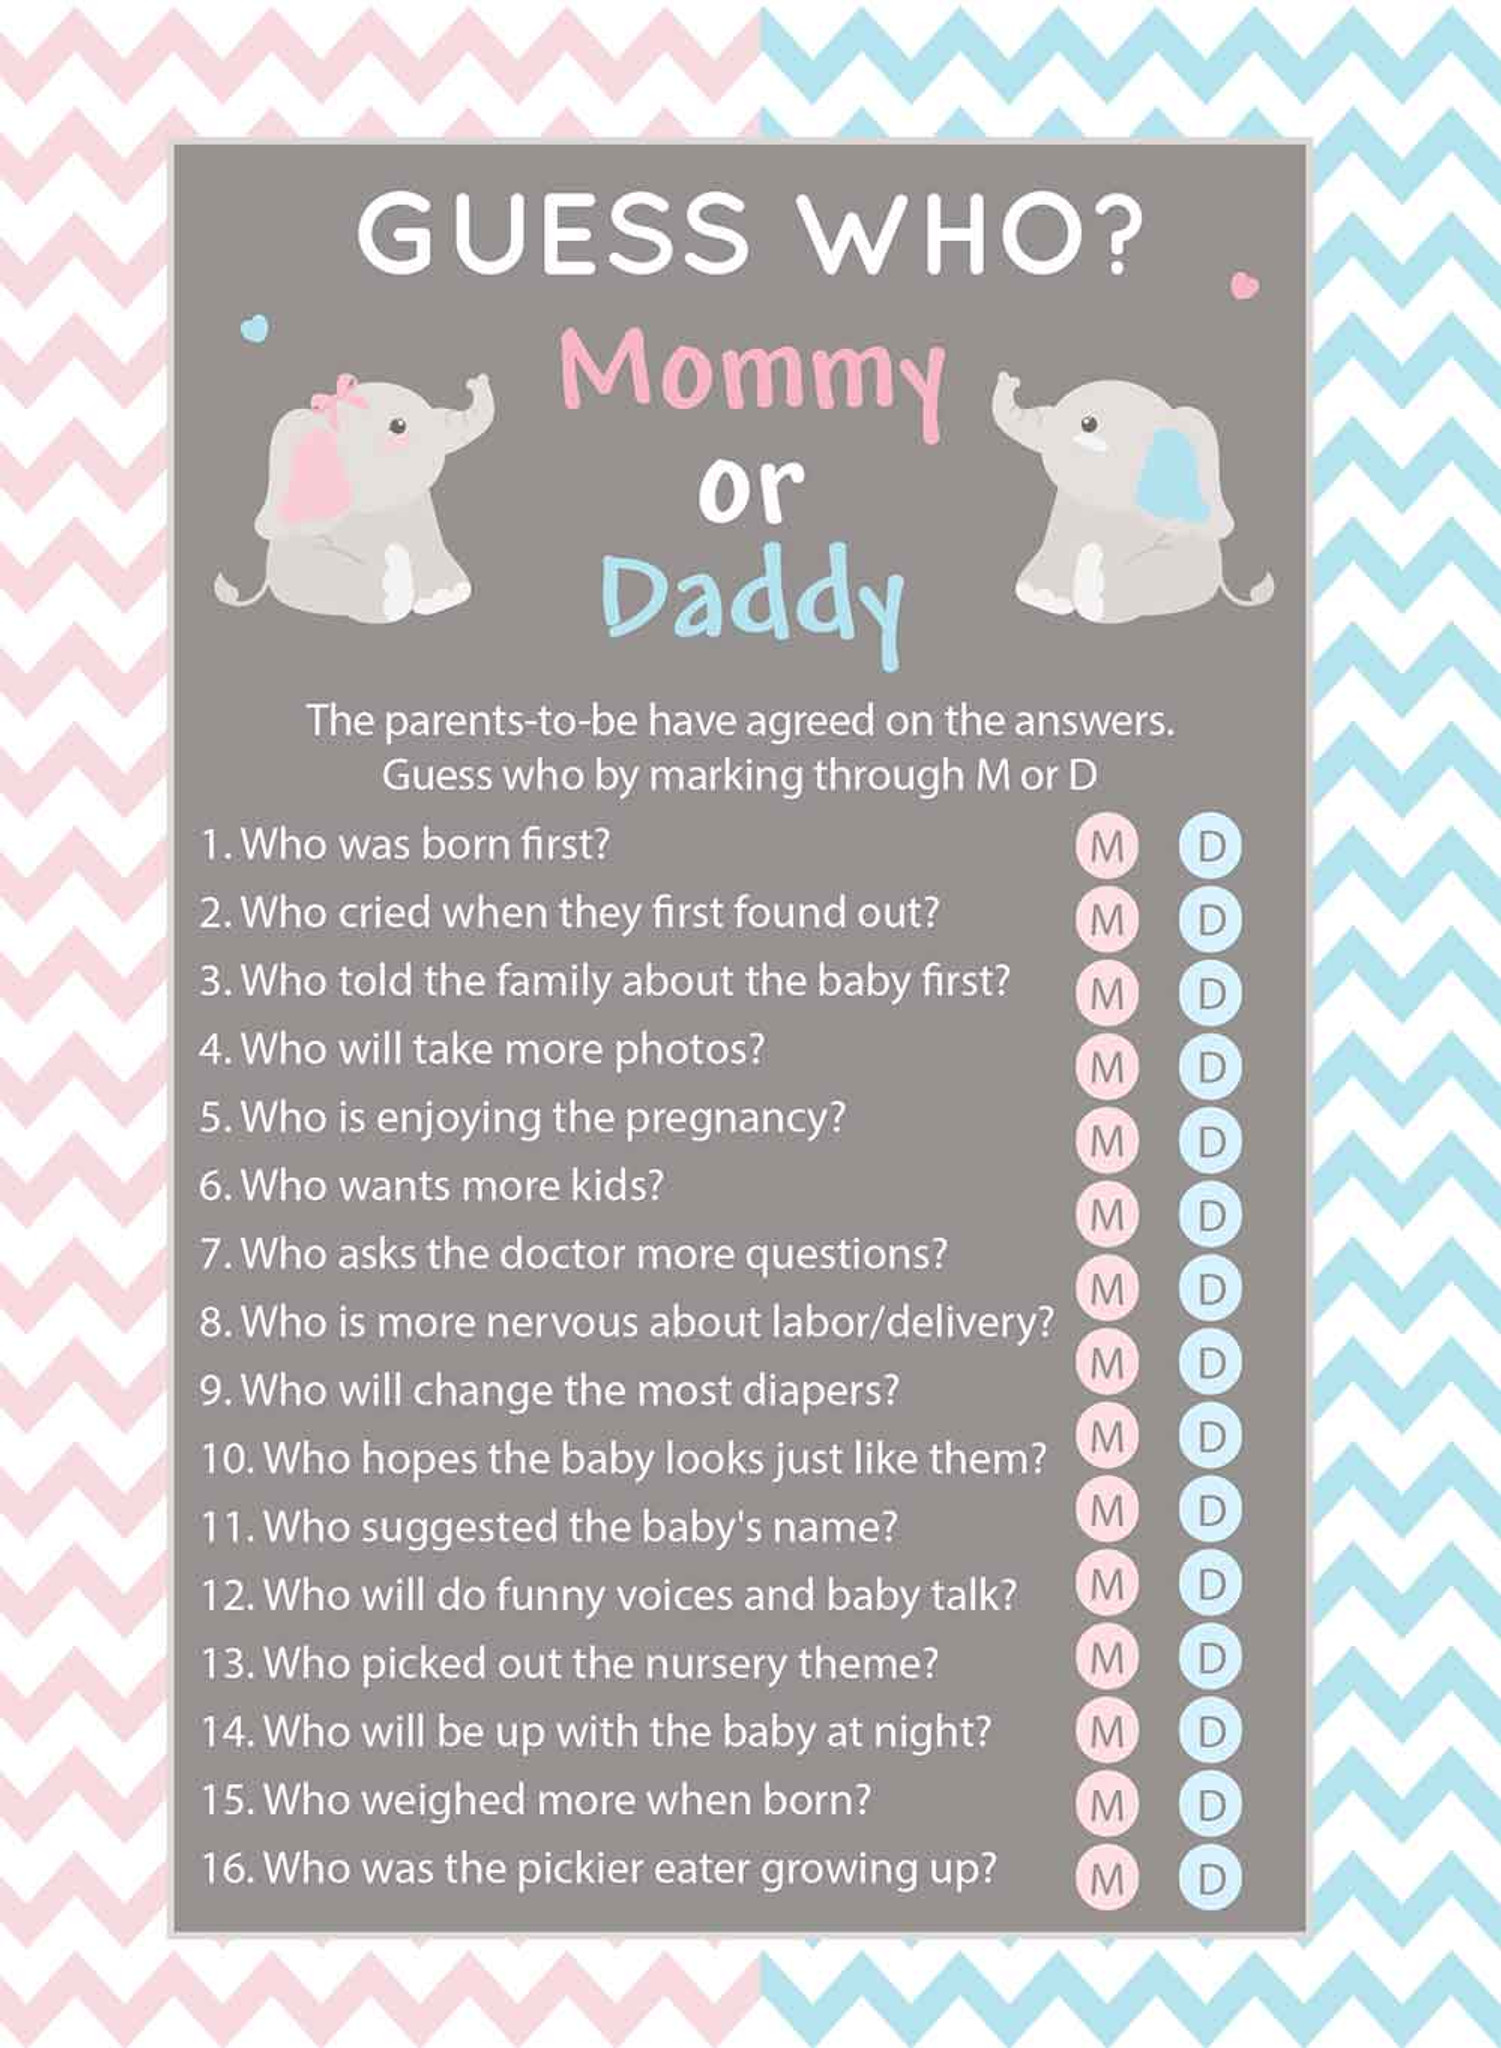 Mommy or Daddy baby shower game 5x7 inches set of 25 Gray ...